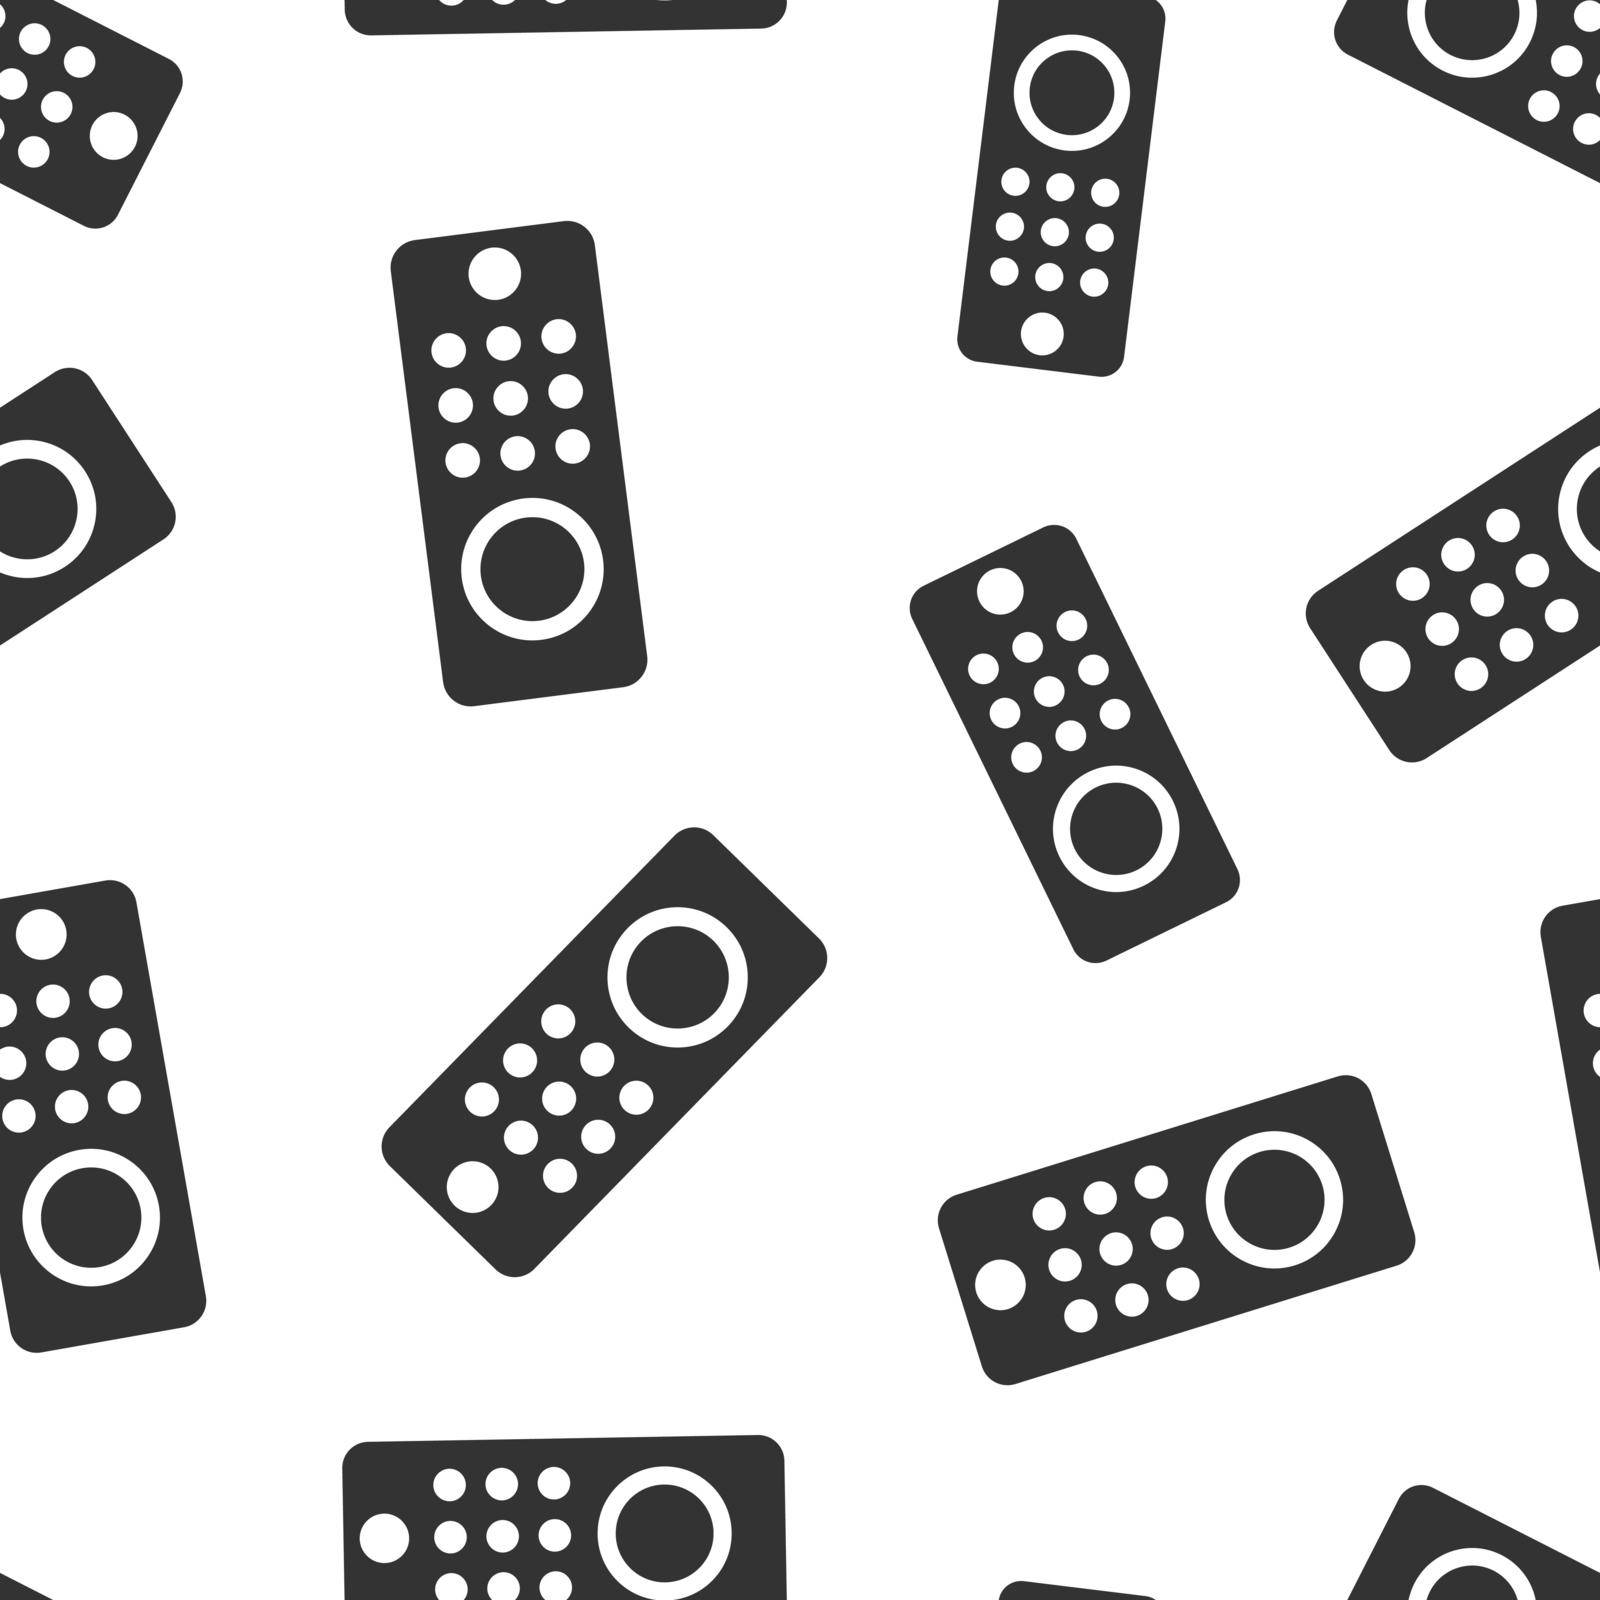 Tv remote icon in flat style. Television sign vector illustration on white isolated background. Broadcast seamless pattern business concept.